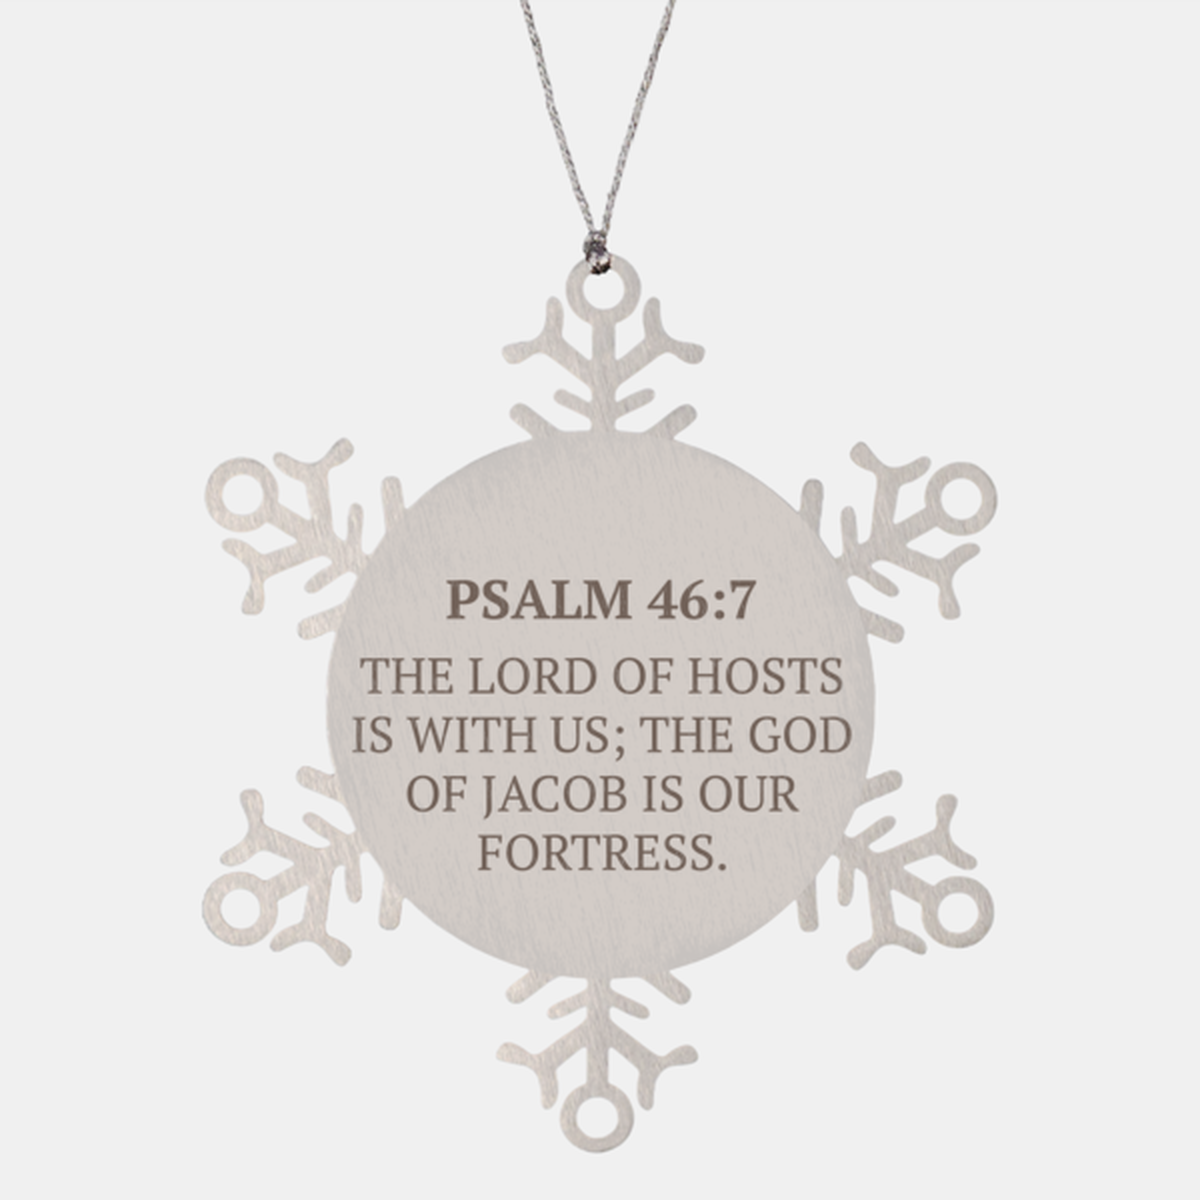 Christian Ornaments For Christmas Tree, The Lord Of Hosts Is With Us, Religious Christmas Decorations, Scripture Ornaments Gifts, Bible Verse Ornament